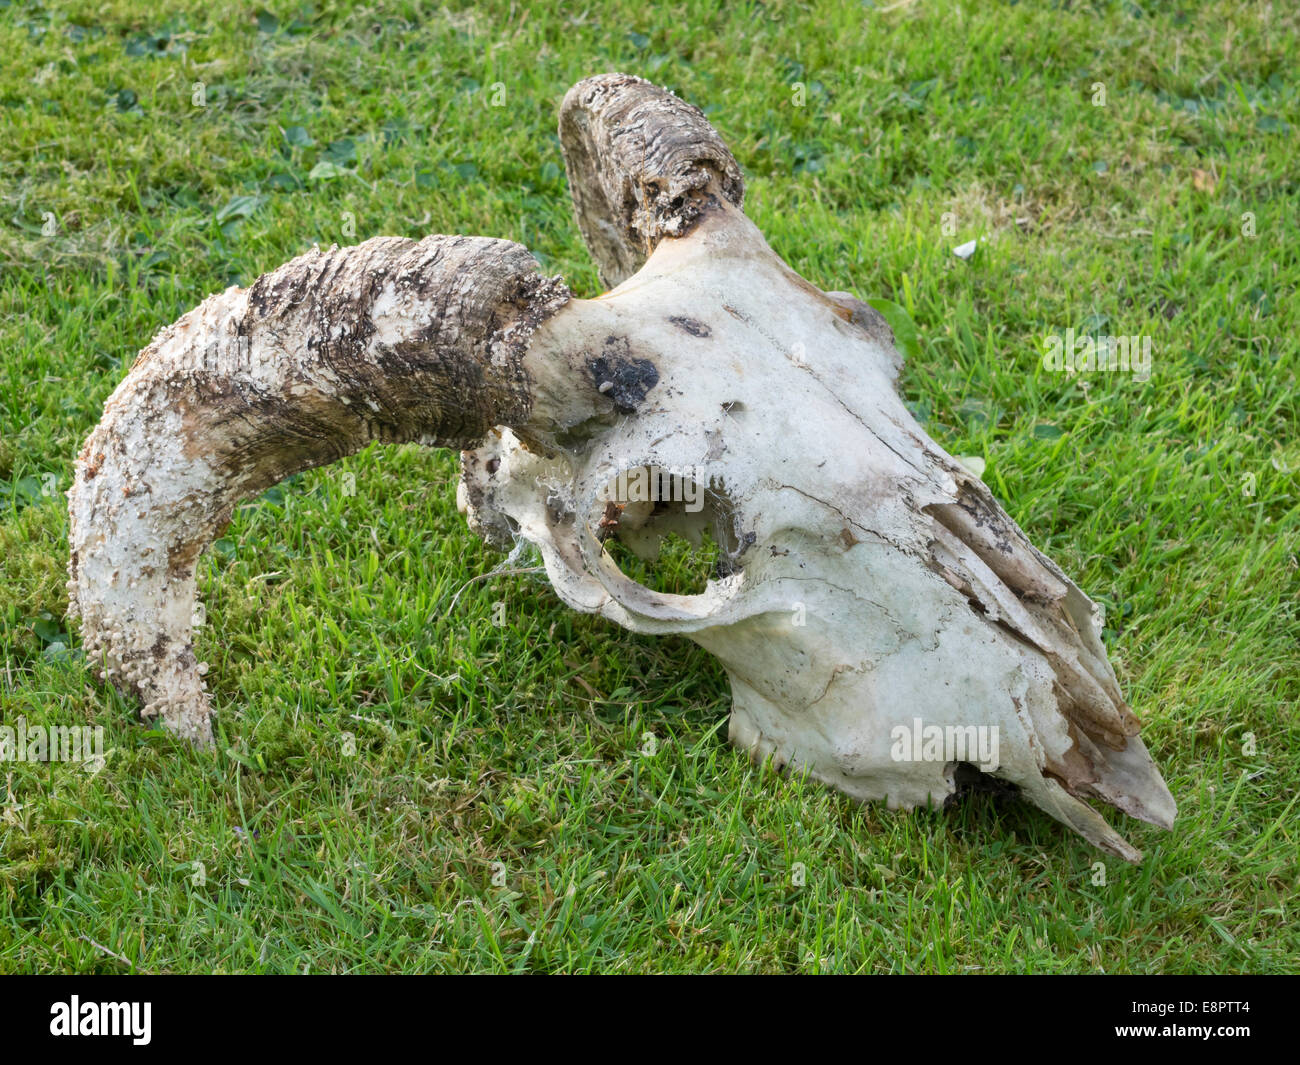 Decayed skull of a domestic sheep (Ovis aries) with strong curved horns lying on grass Stock Photo